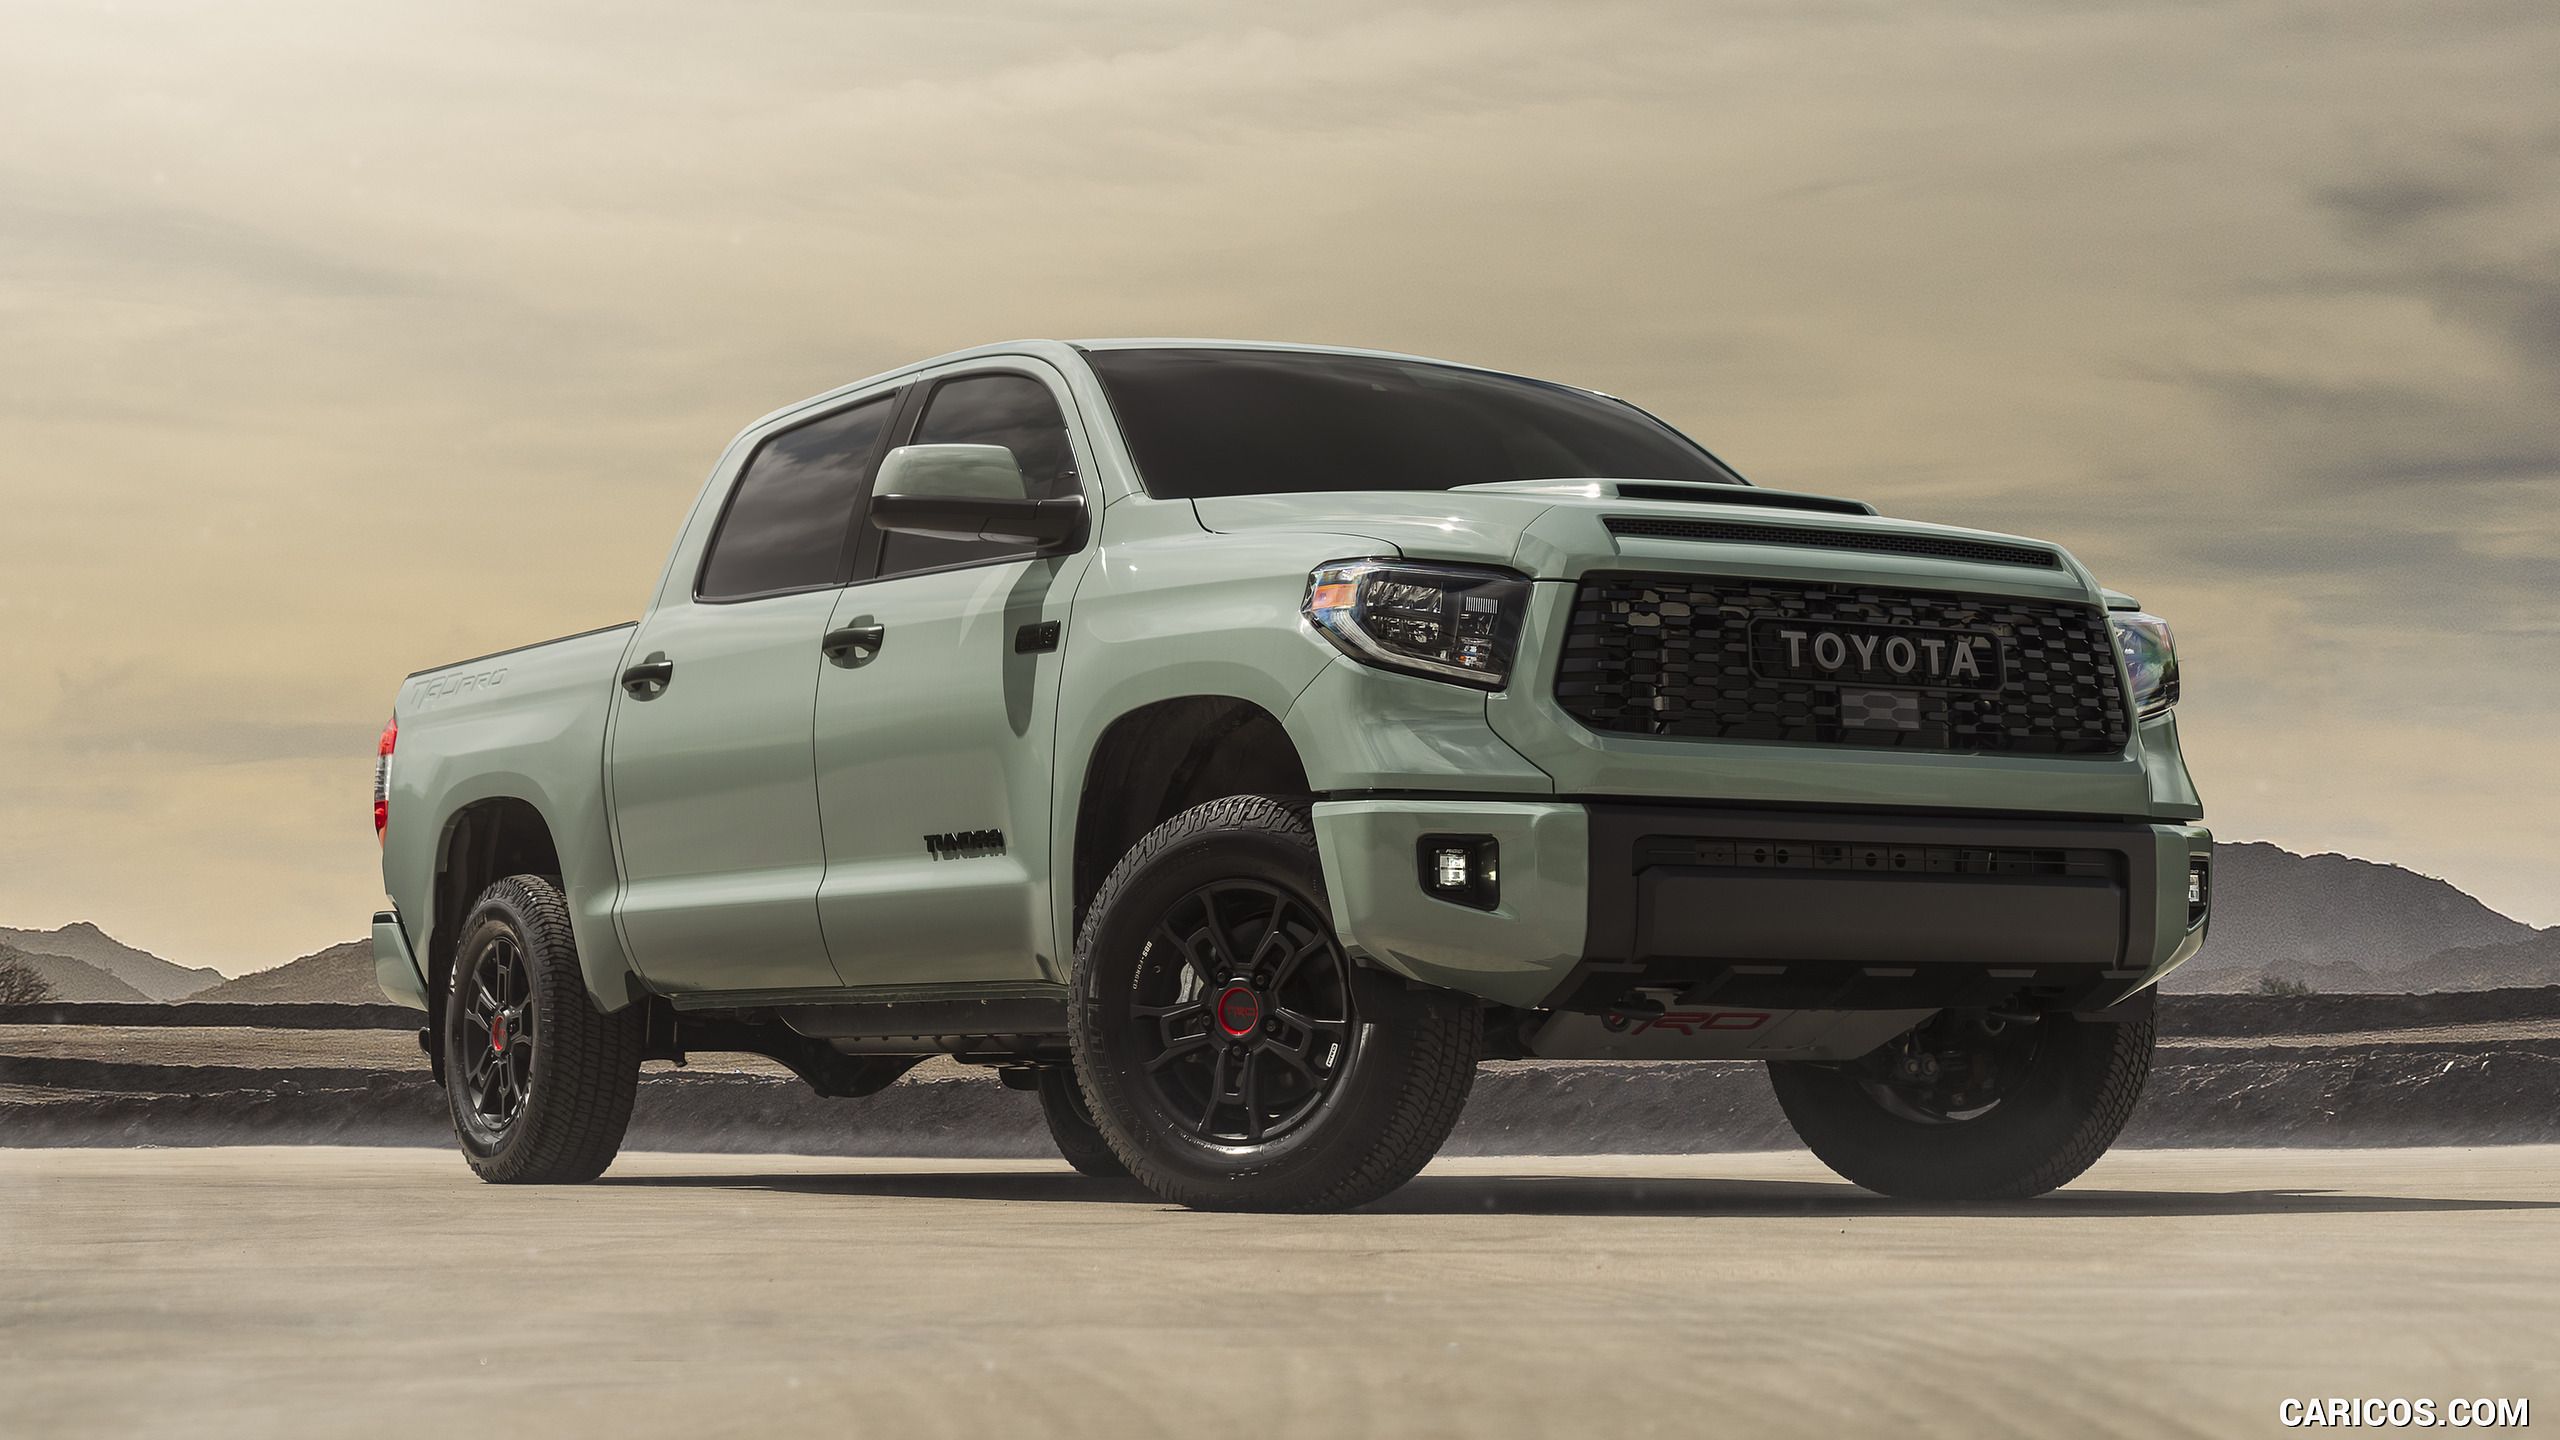 2021 Toyota Tundra Wallpapers - Wallpaper Cave